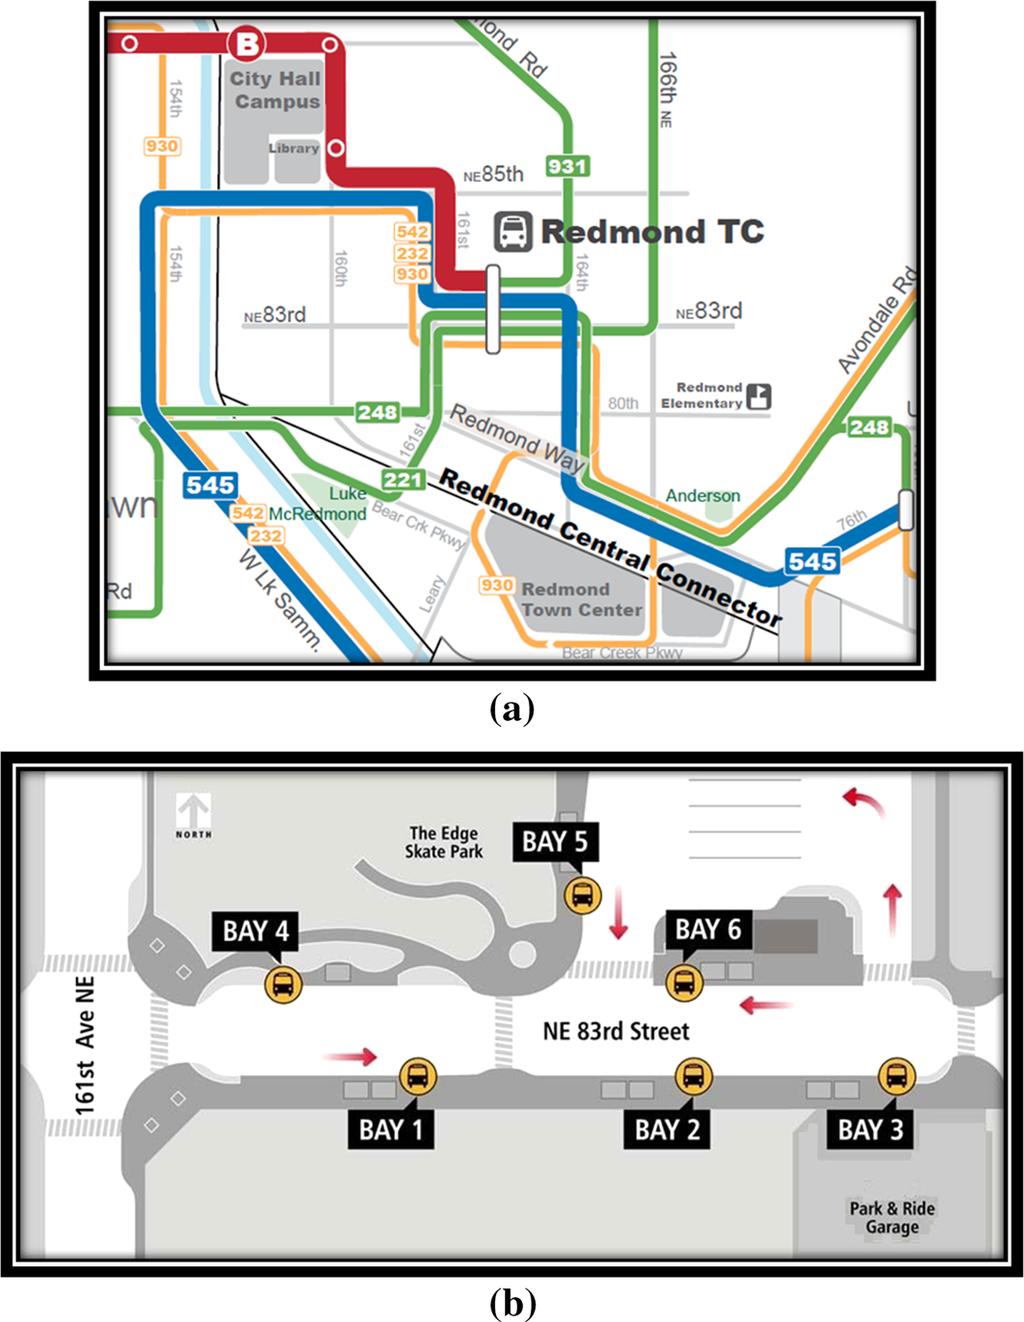 Fig. 2 Transit services at Redmond. a Buses that go through Redmond Transit Center (source http://www. redmond.gov/common/pages/userfile.aspx?fileid=160128).